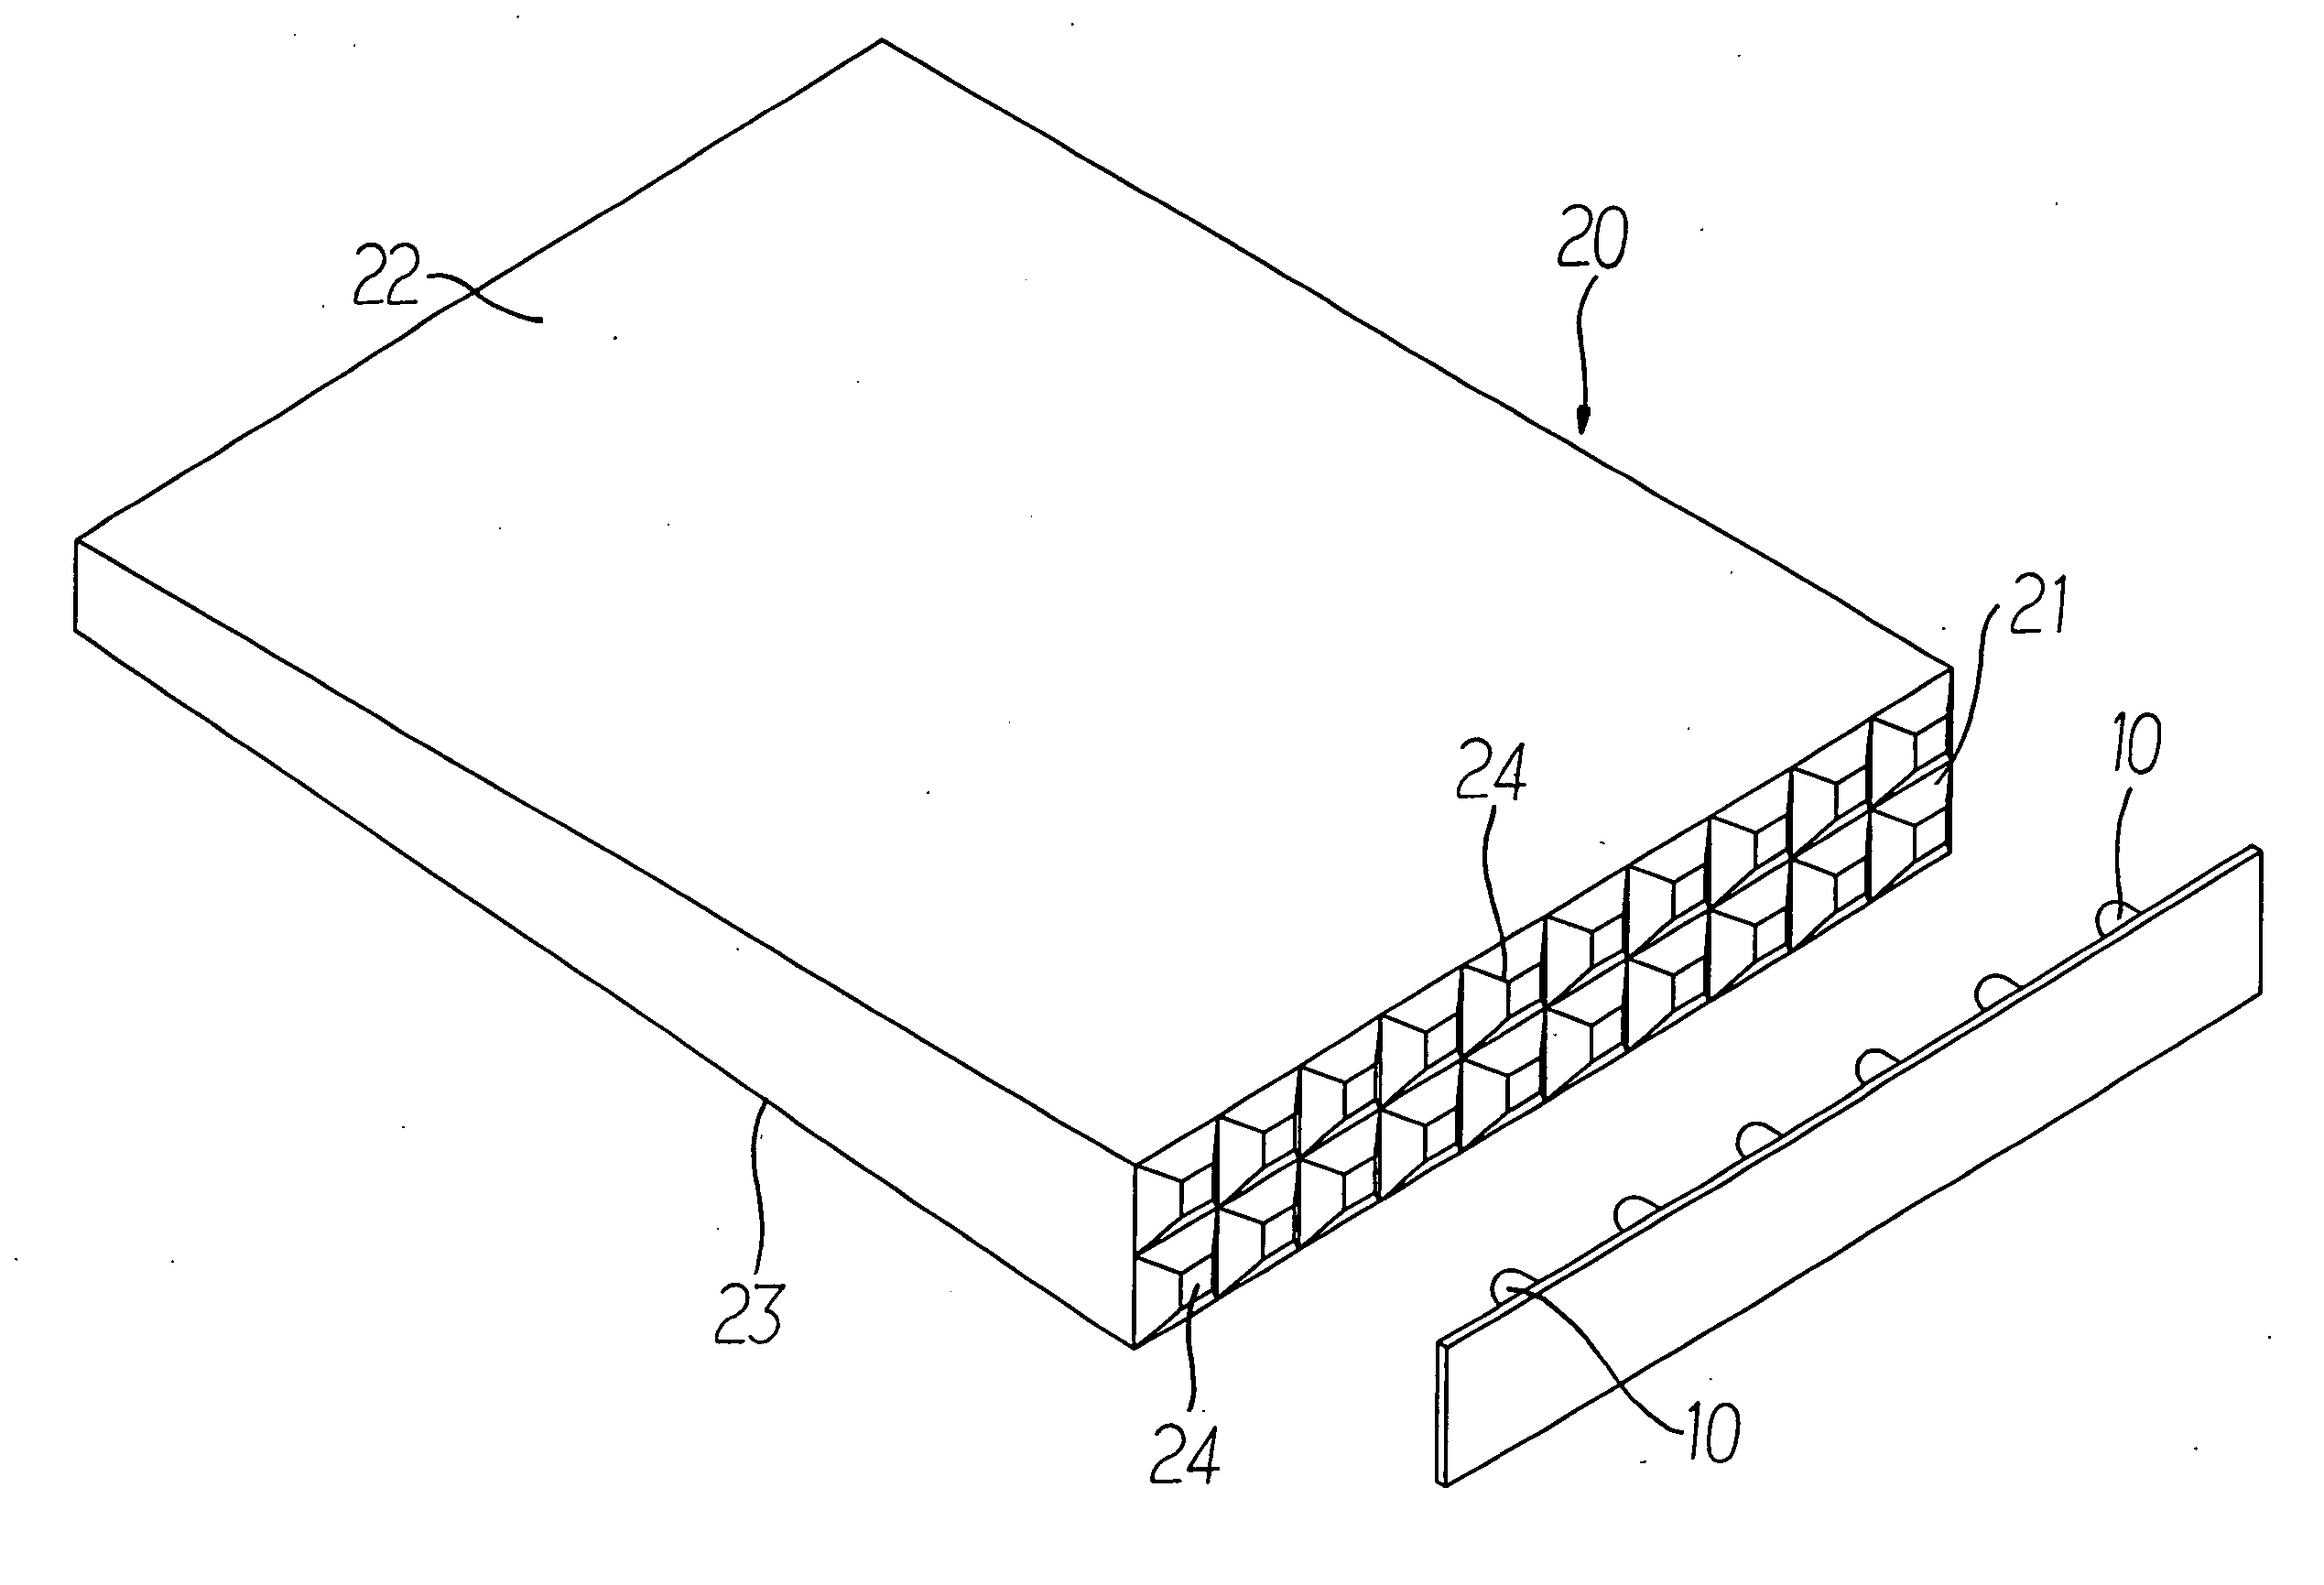 Incident assembly of light guide plate